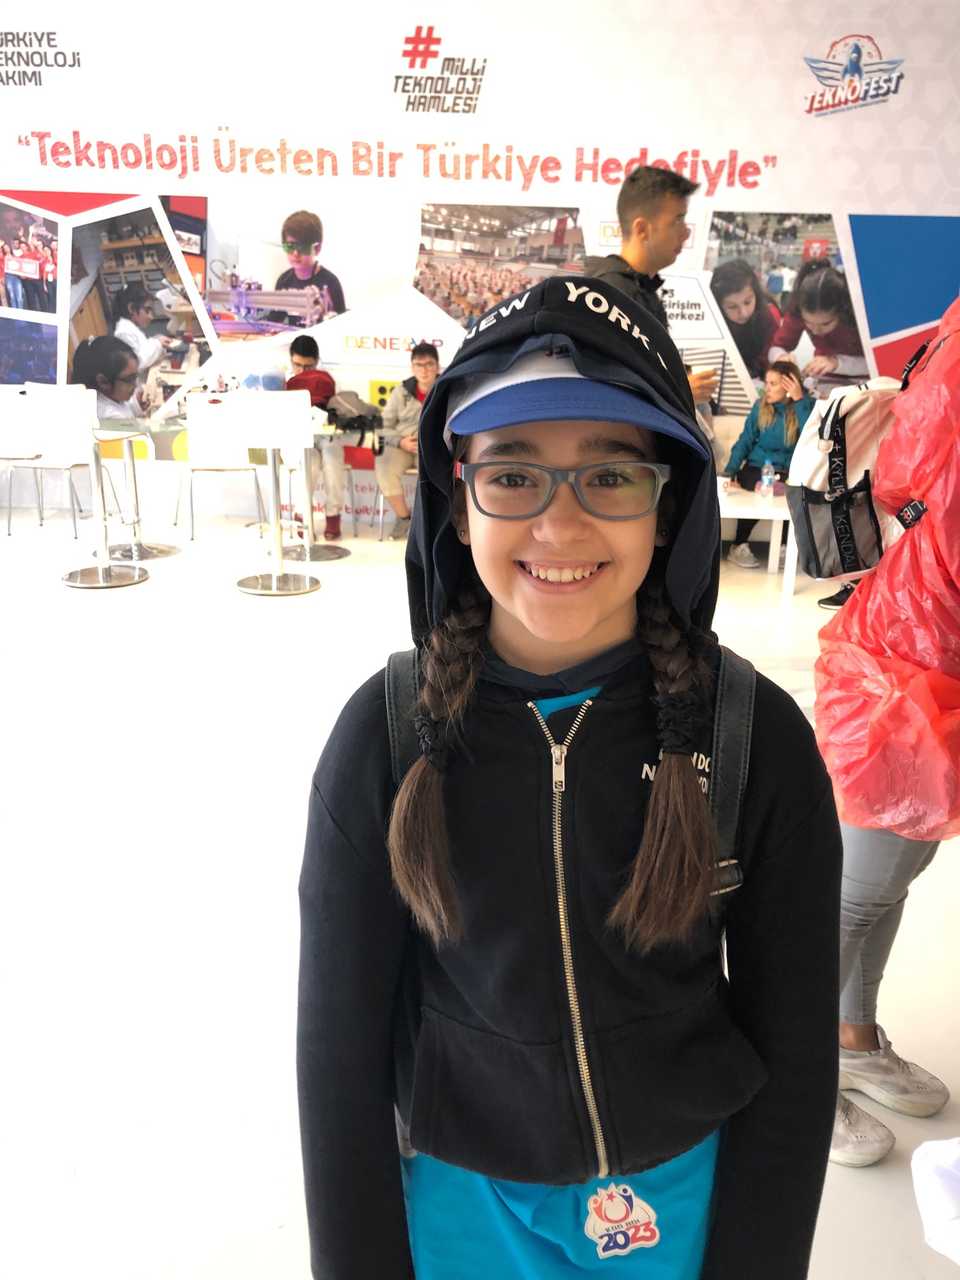 Neva Oden was visiting Teknofest from Edirne’s Efkan Yildirim middle school. The sign behind her says “Our goal is a Turkey that produces technology”.